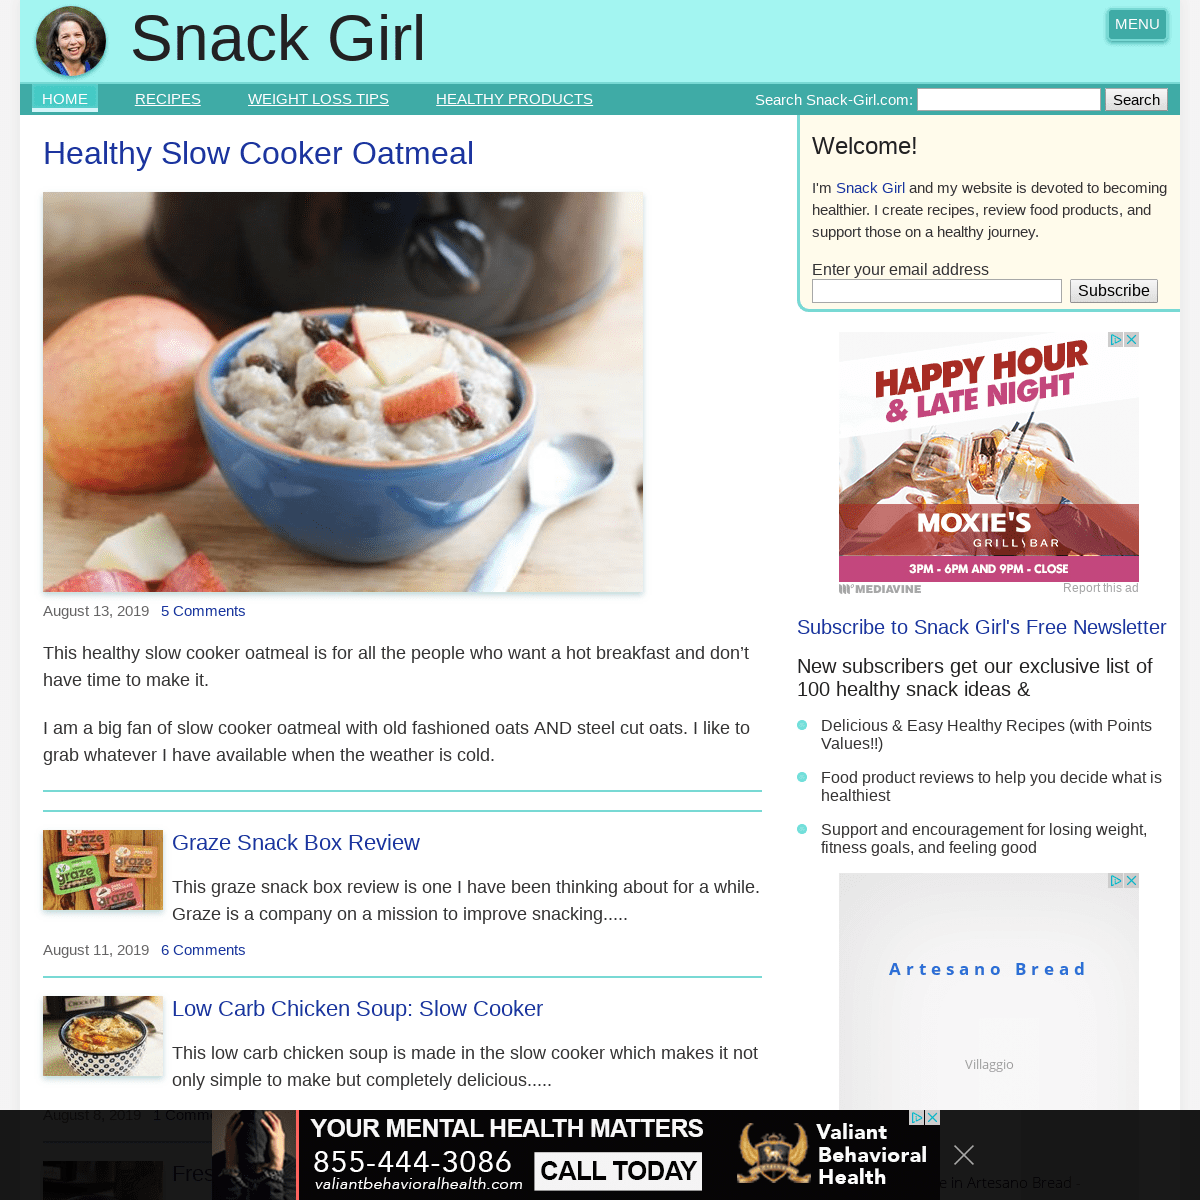 Snack Girl: easy recipes & healthy weight loss tips